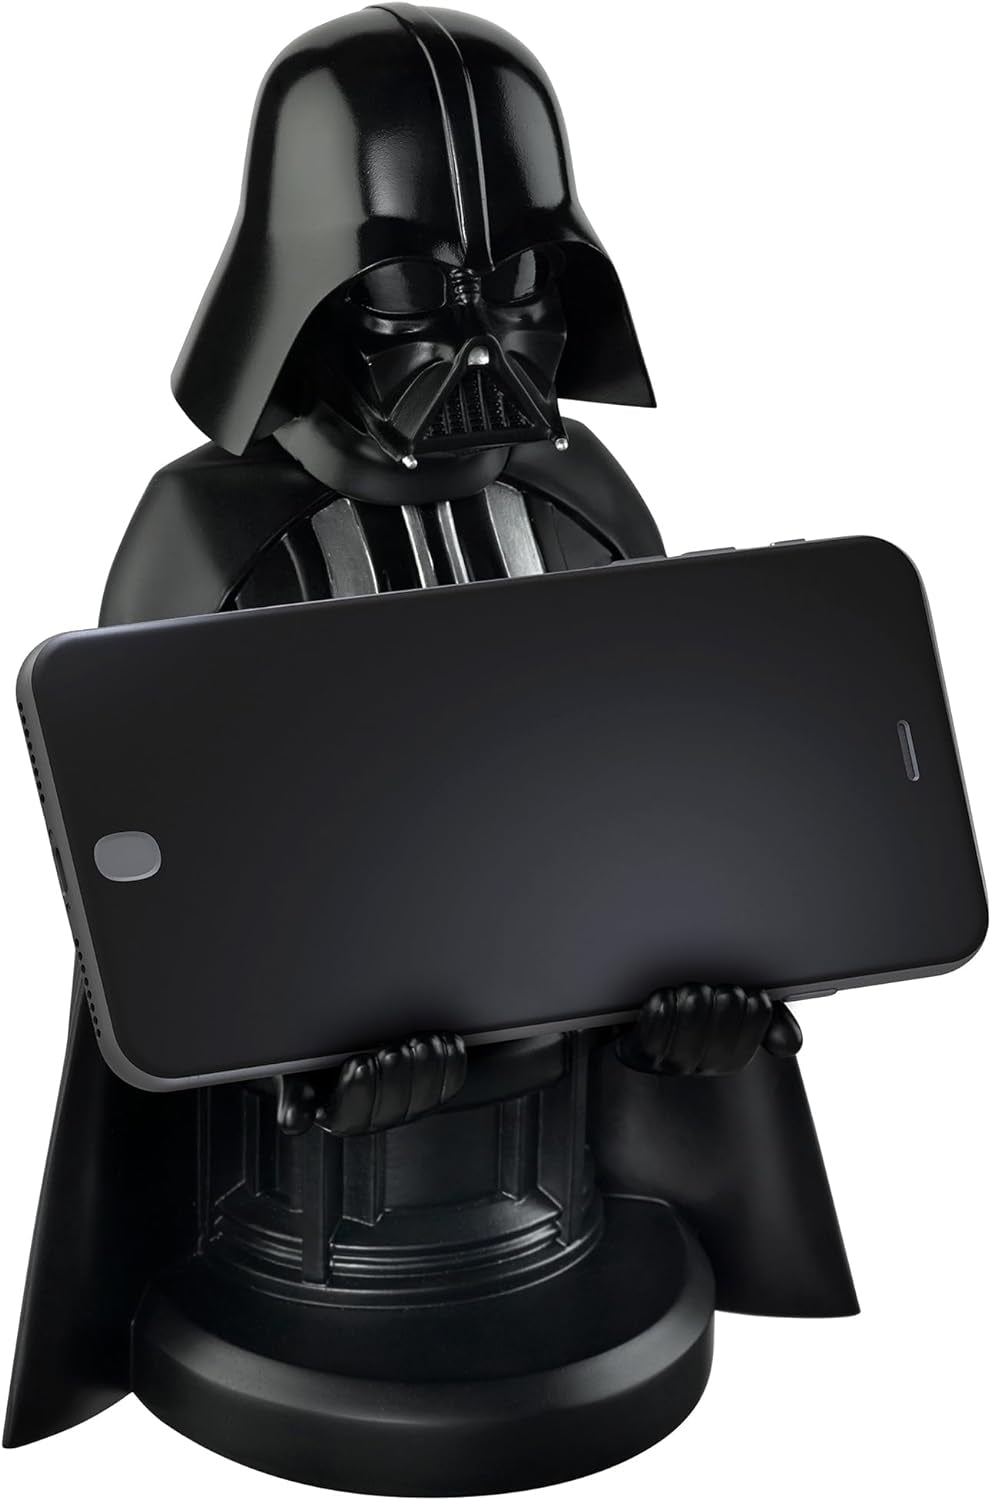 : Star Wars: Darth Vader - Original Mobile Phone & Gaming Controller Holder, Device Stand, Cable Guys, Licensed Figure (Multi-Colored)